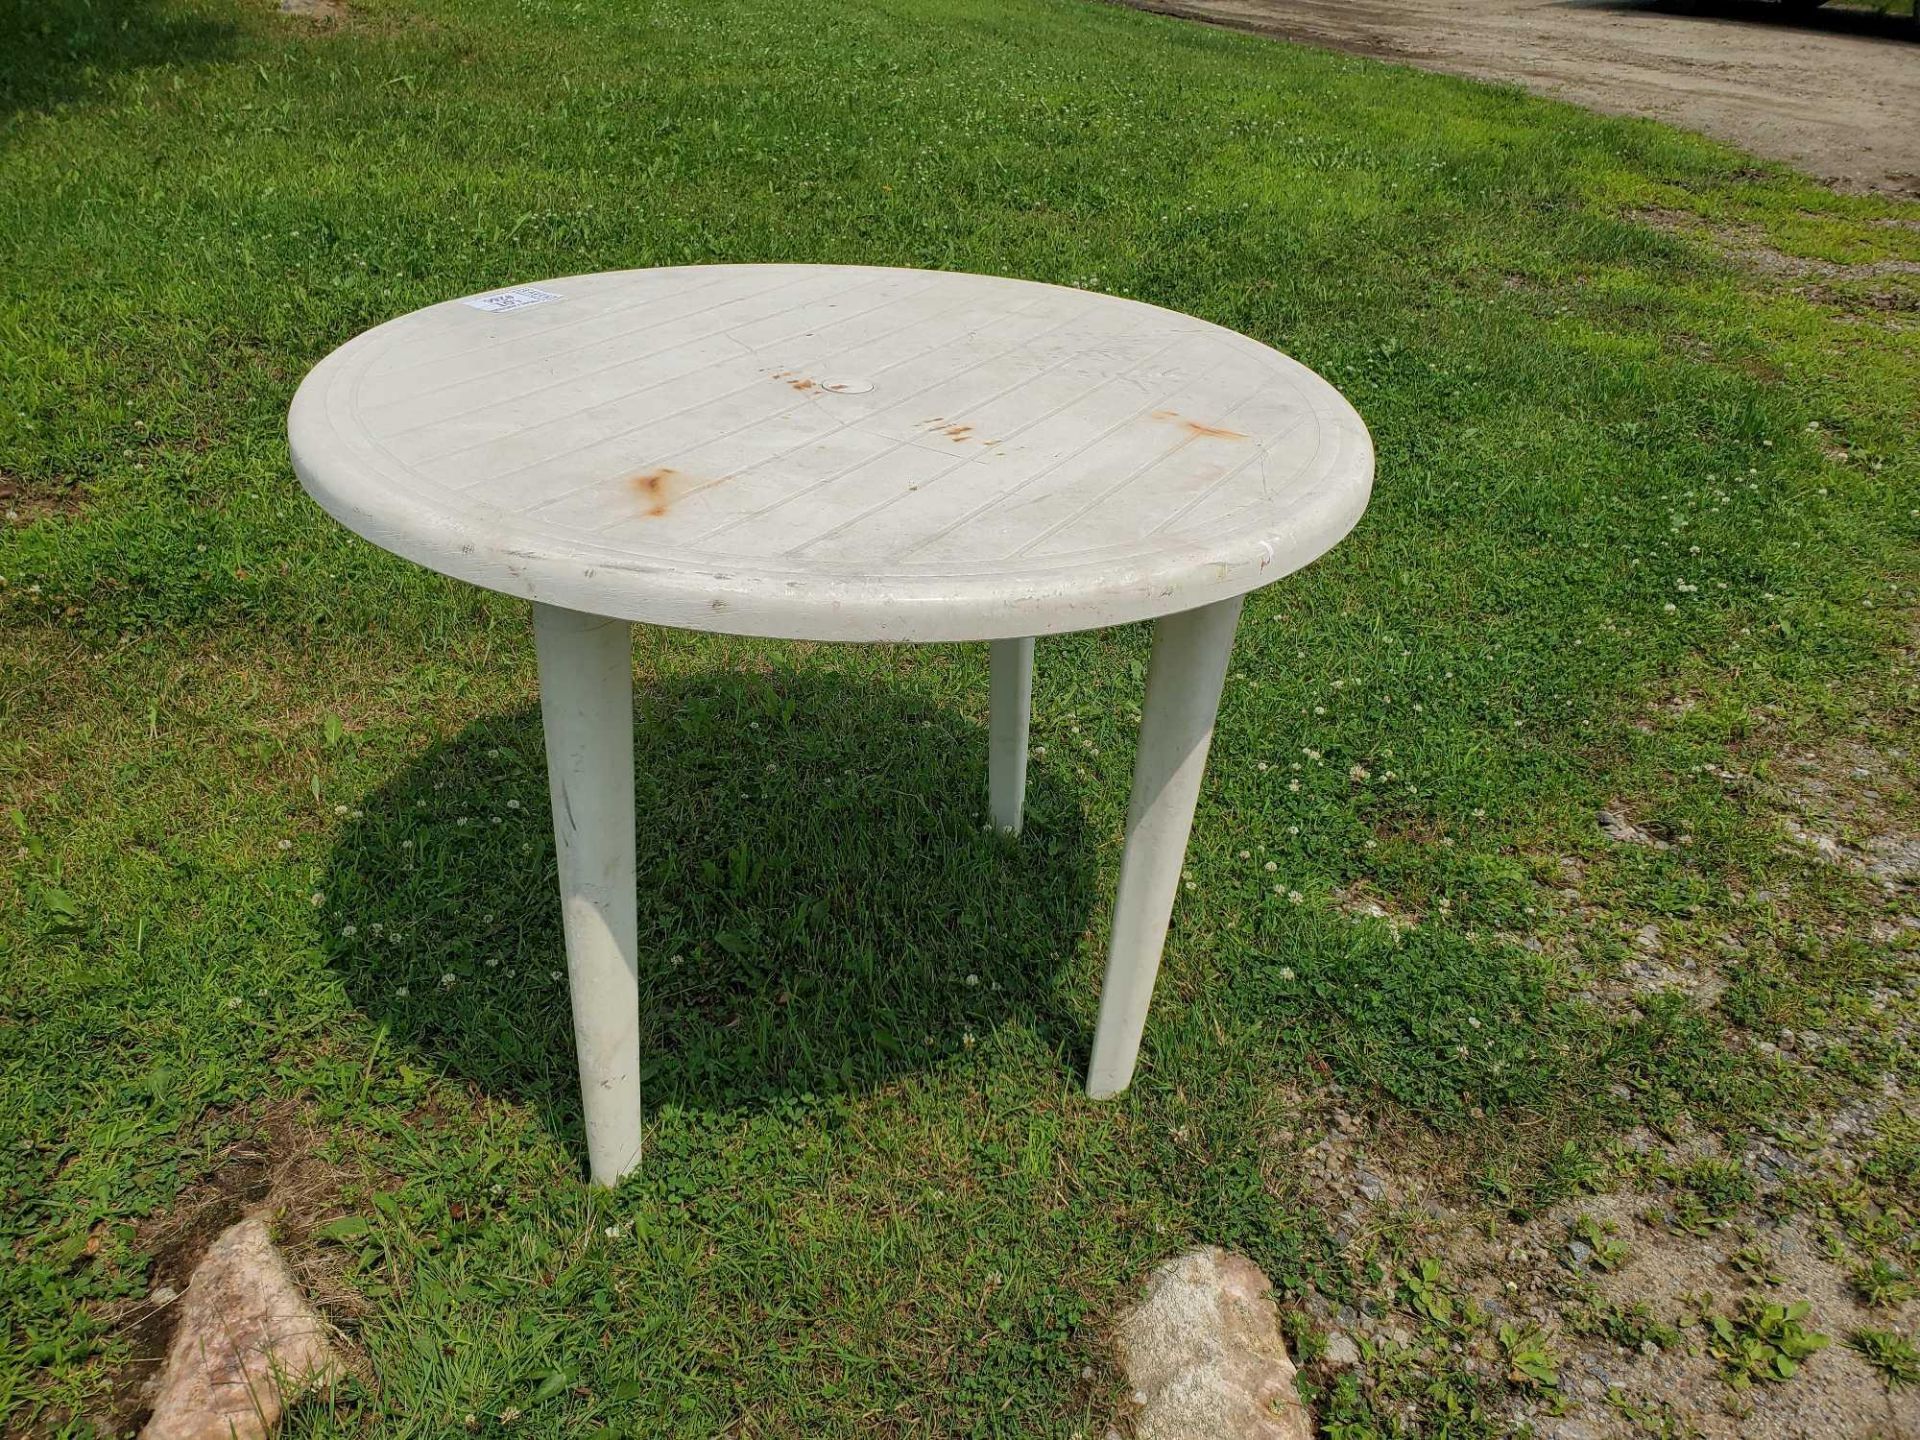 outdoor round table / table ronde d'exterieur